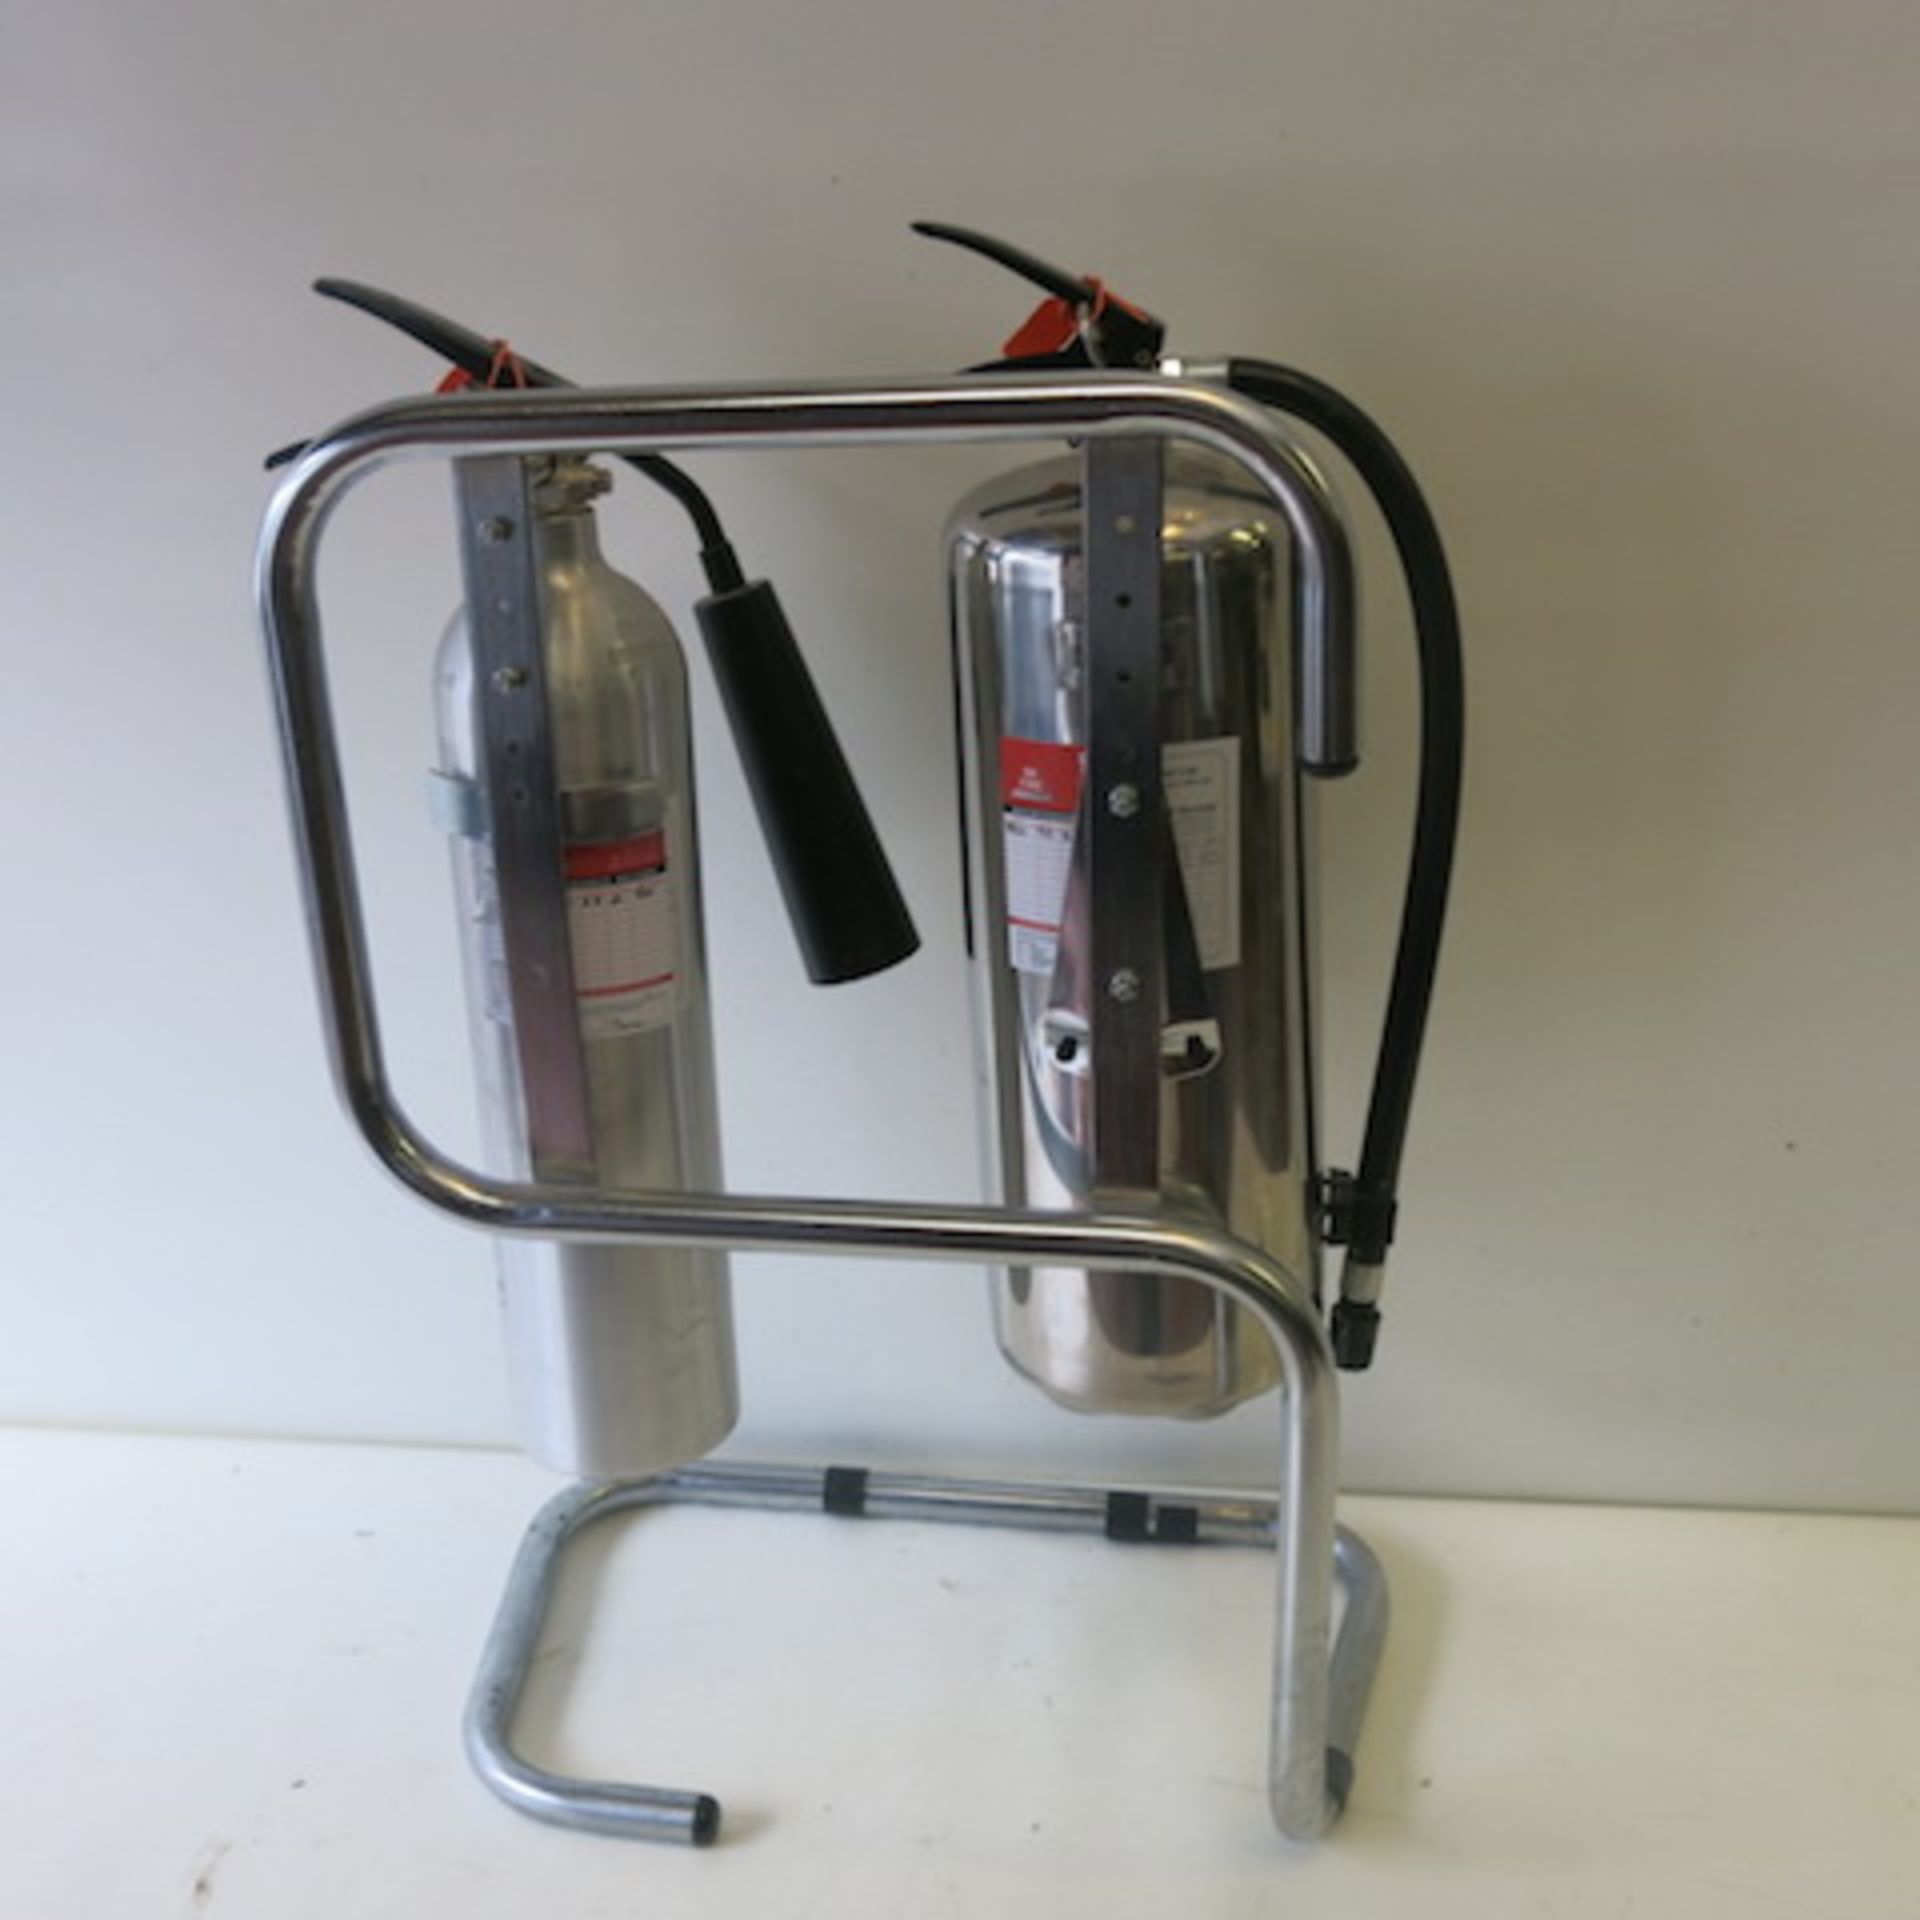 2 x Stainless Steel/Aluminum Fire Extinguishers on Frame, 1 Foam, 1 Carbon Dioxide, Discharge Date - Image 4 of 4